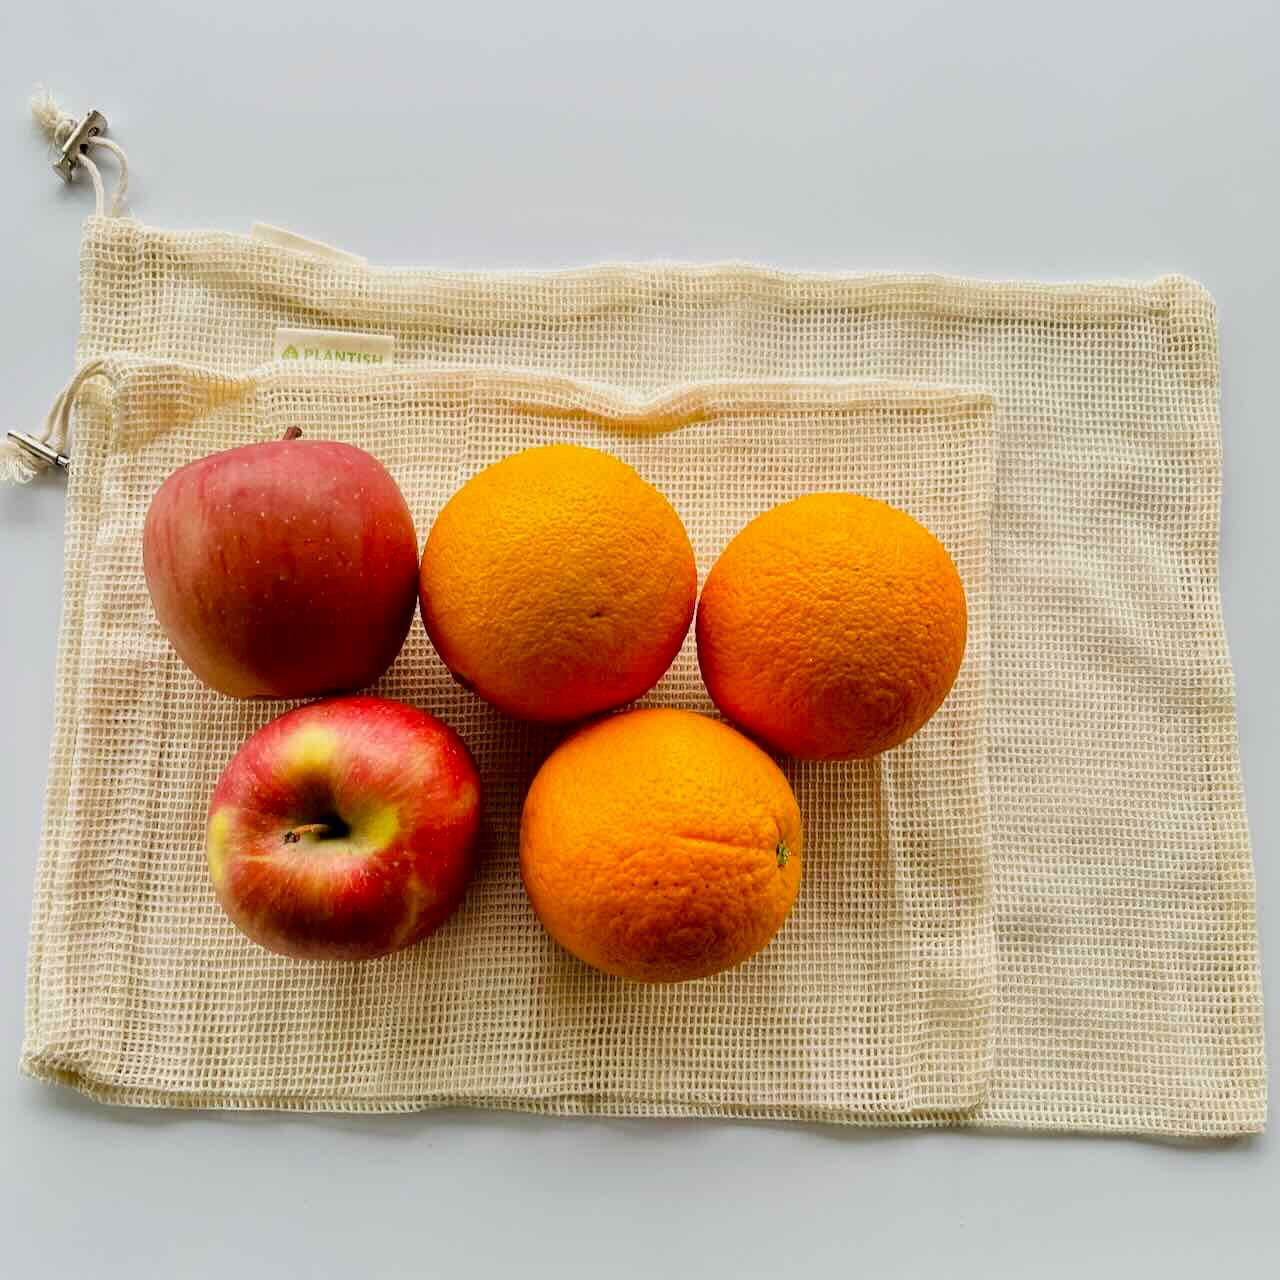 oranges and apples on top of mesh bags